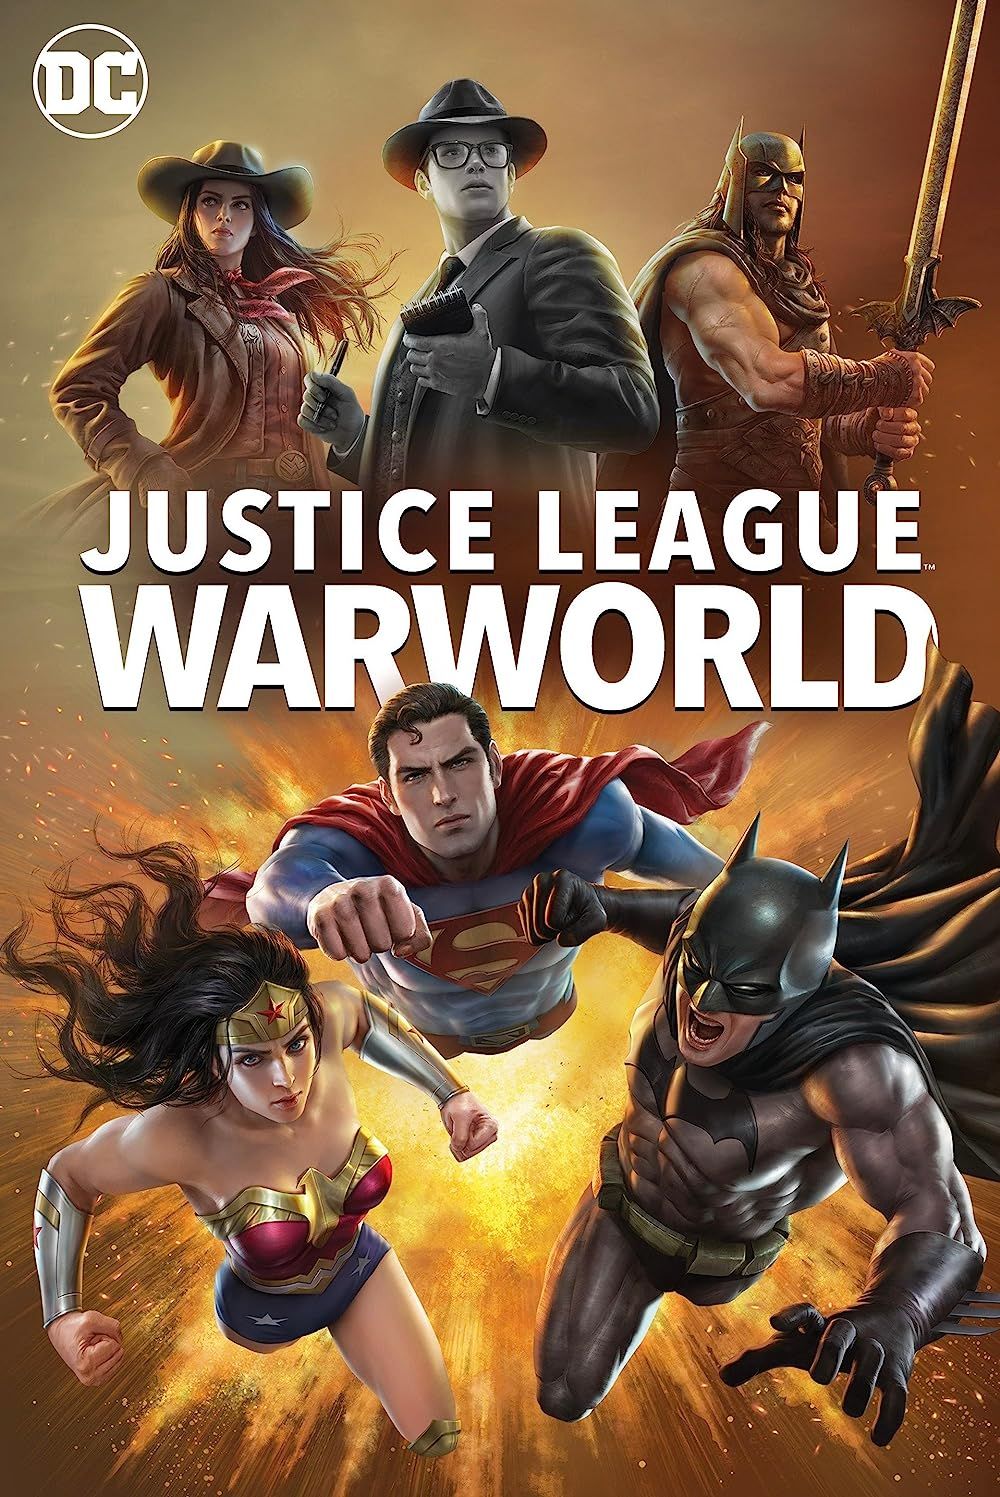 Justice League Warworld (2023) English Movie HDRip download full movie